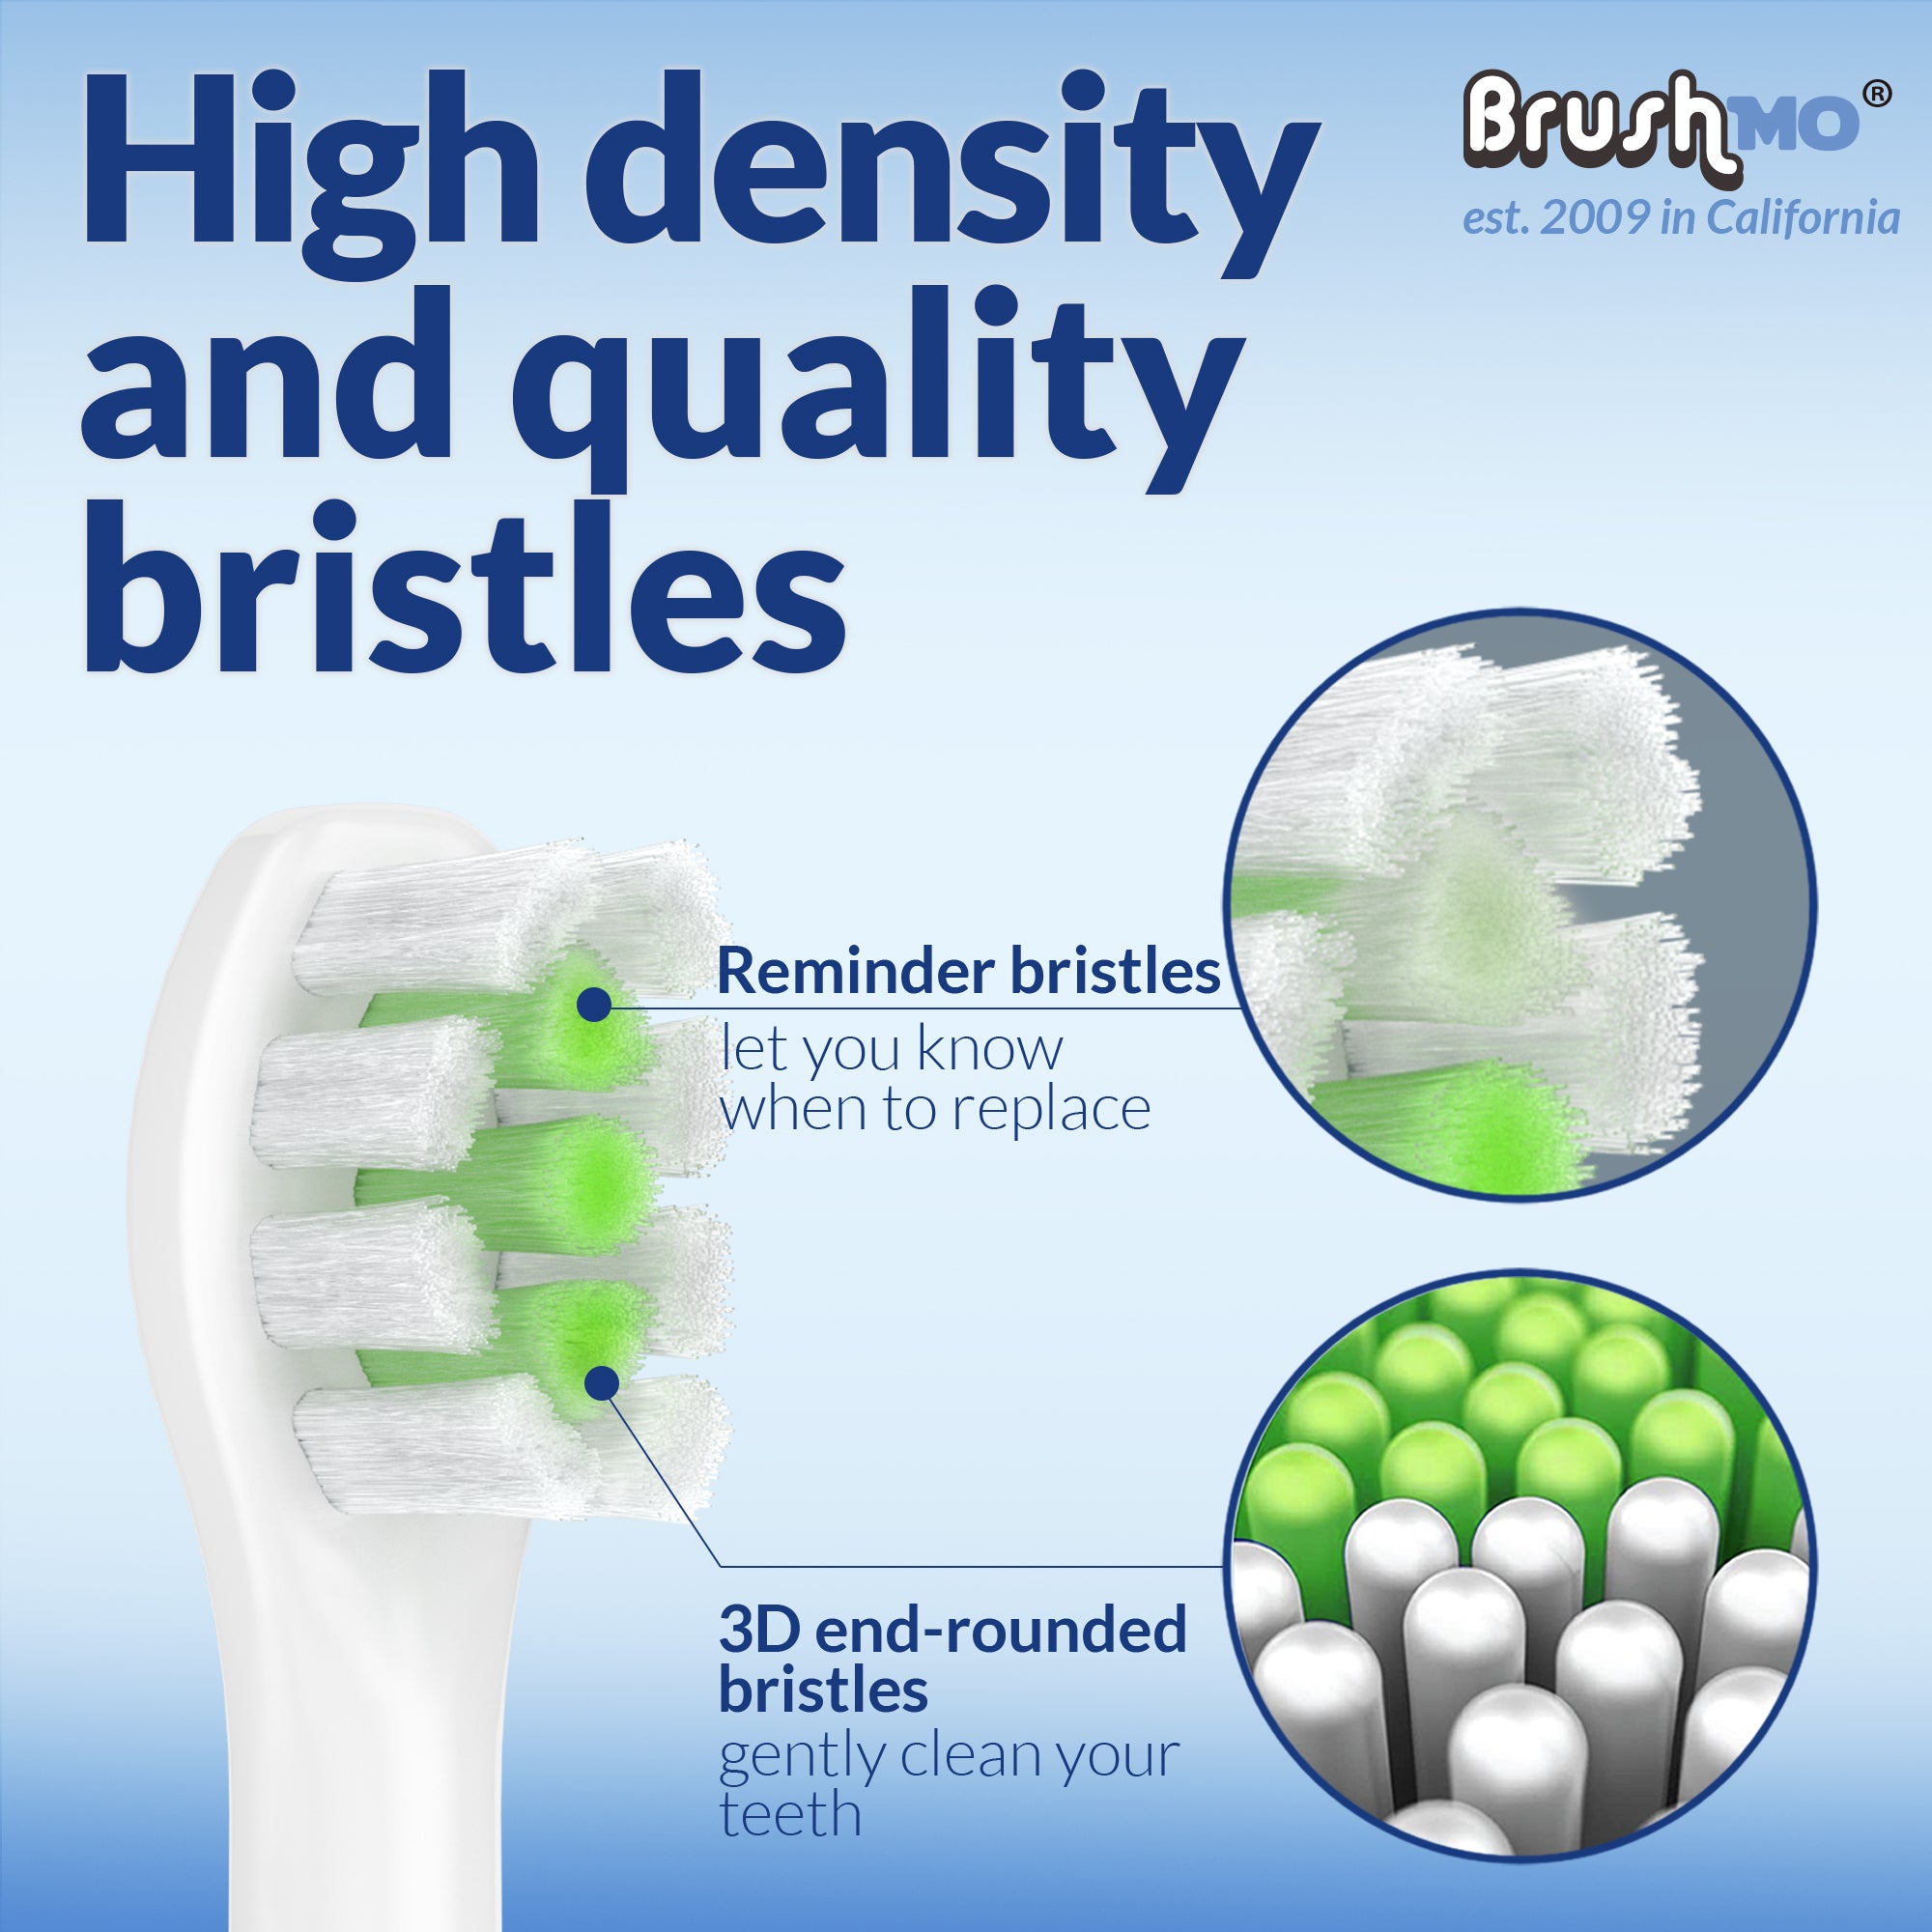 Replacement Toothbrush Heads Compatible with Sonicare DiamondClean HX6072, White 8 Pack Compact